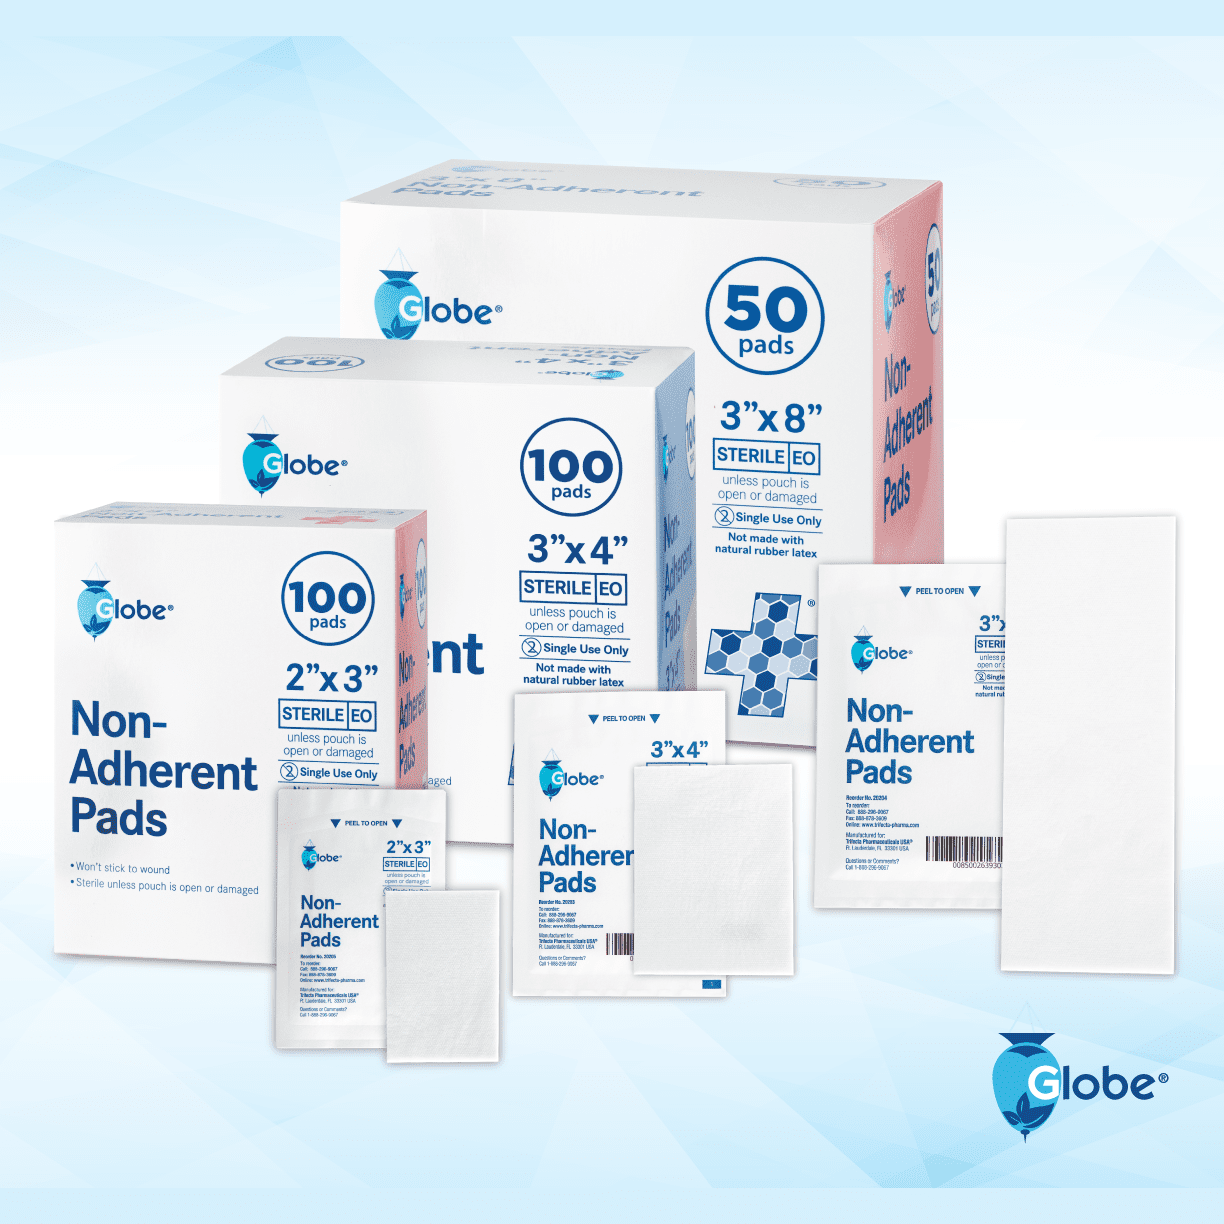 Globe Sterile Non-Adherent Pads | 50-Pack, 3” x 8” | Non-Adhesive Wound Dressing| Highly Absorbent & Non-Stick, Painless Removal-Switch | Individually Wrapped for Extra Protection (3 x 8)